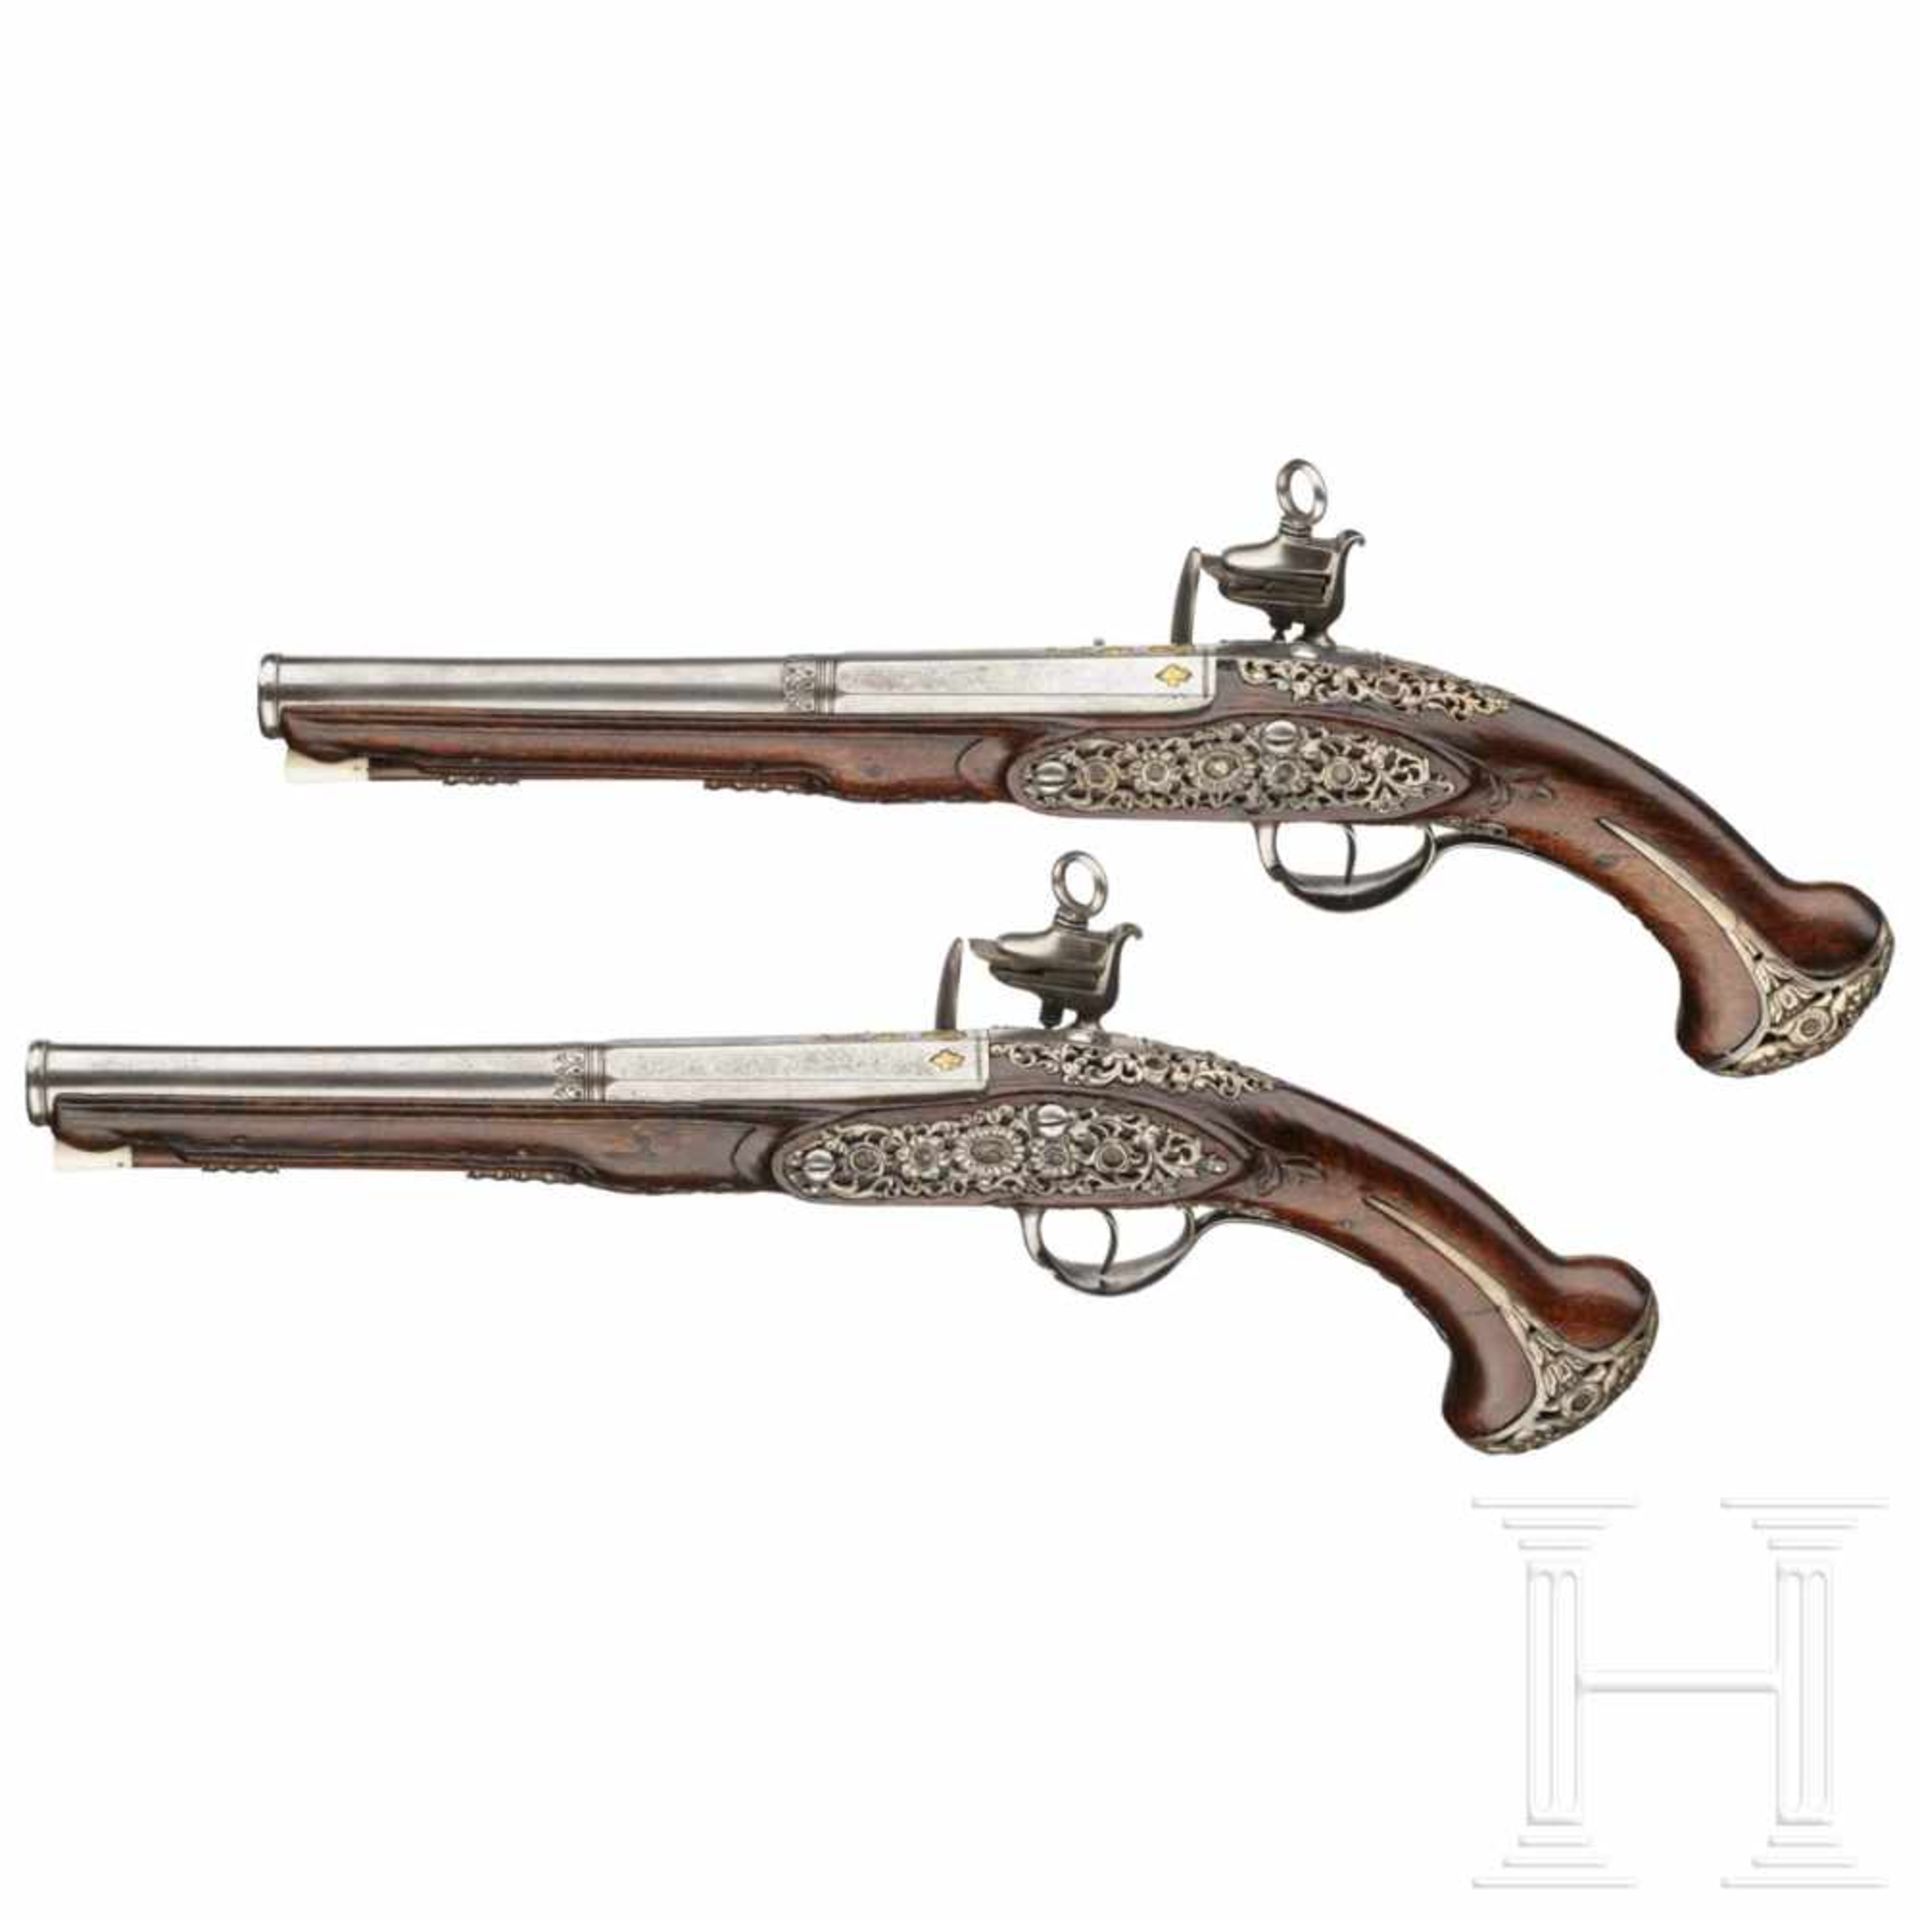 A pair of North Spanish, silver-mounted miquelet pistols, late 18th centuryOctagonal barrels turning - Bild 3 aus 9